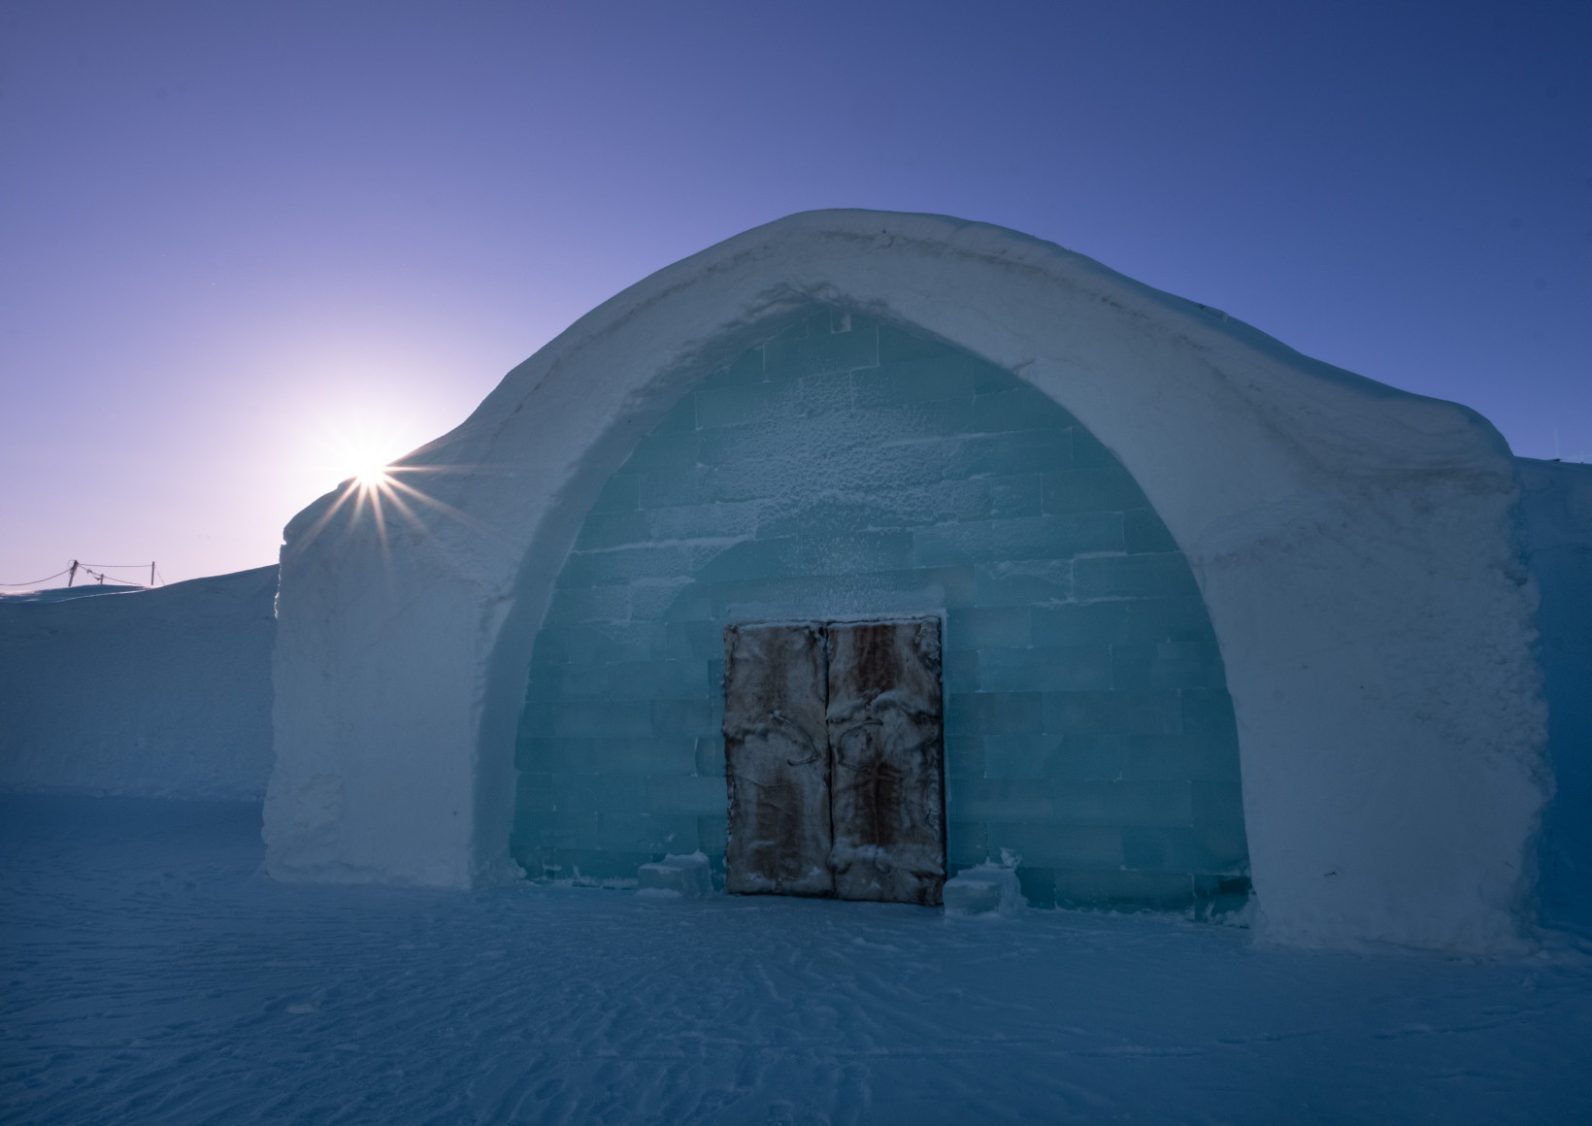 The entrance to the IceHotel rooms.